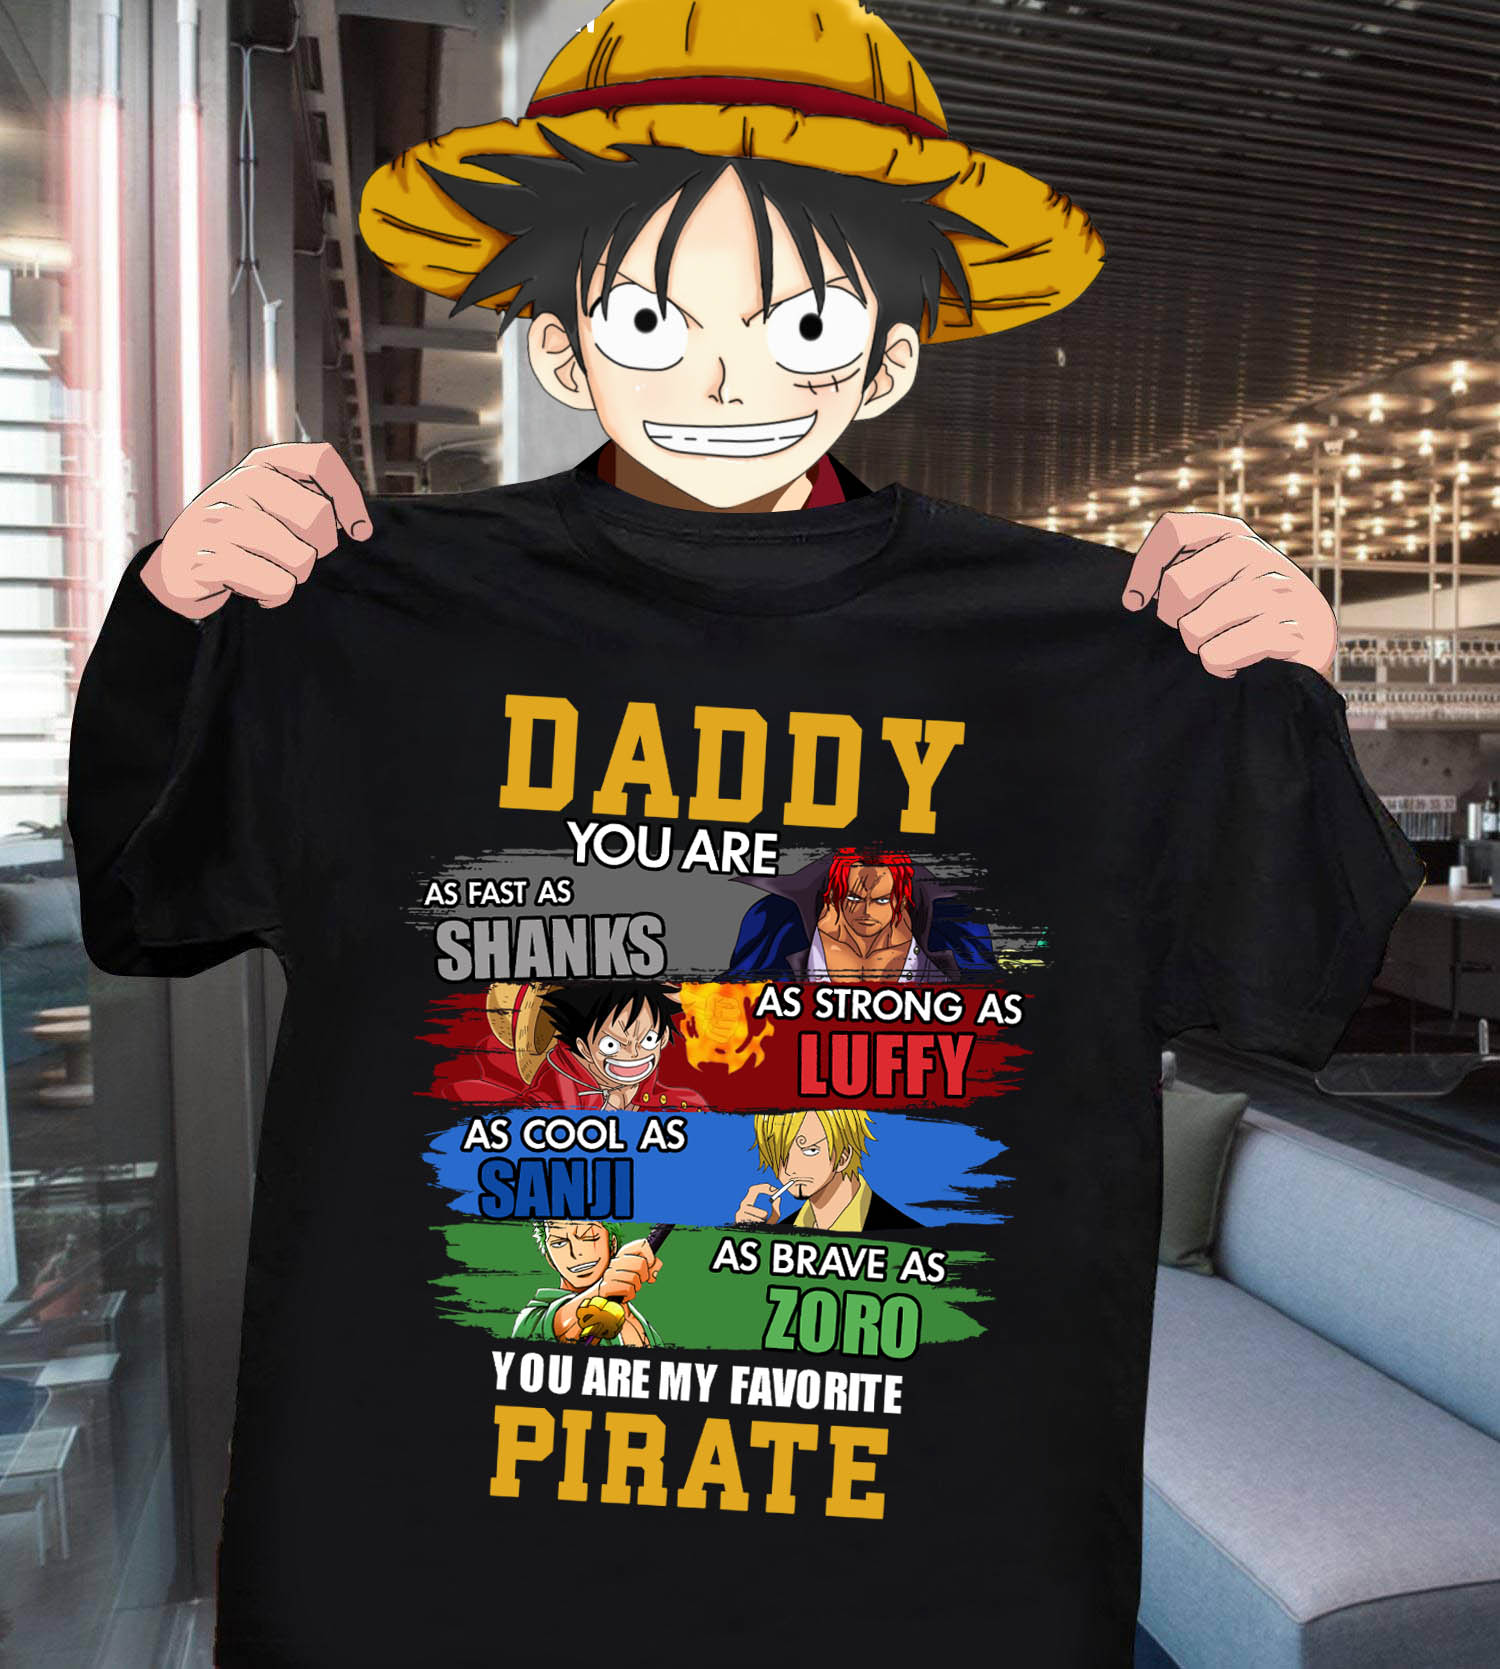 daddy you are as fast as shanks. as strong as luffy. as cool as sanji. as brave as zoro. you are my favorite pirate